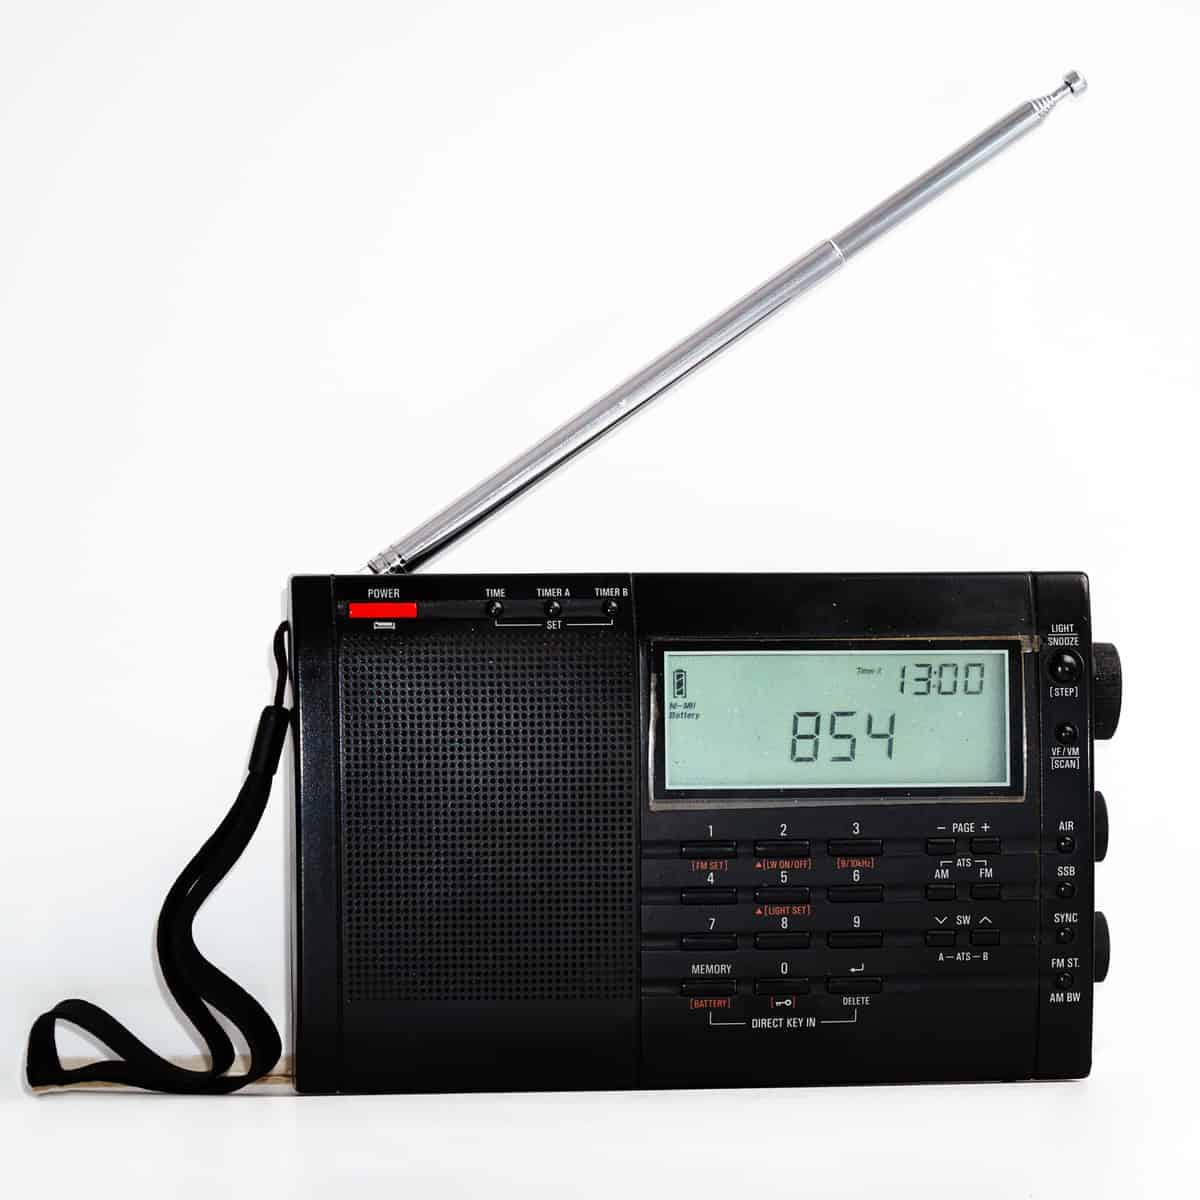 Modern black shortwave radio with antenna and digital display on a white background